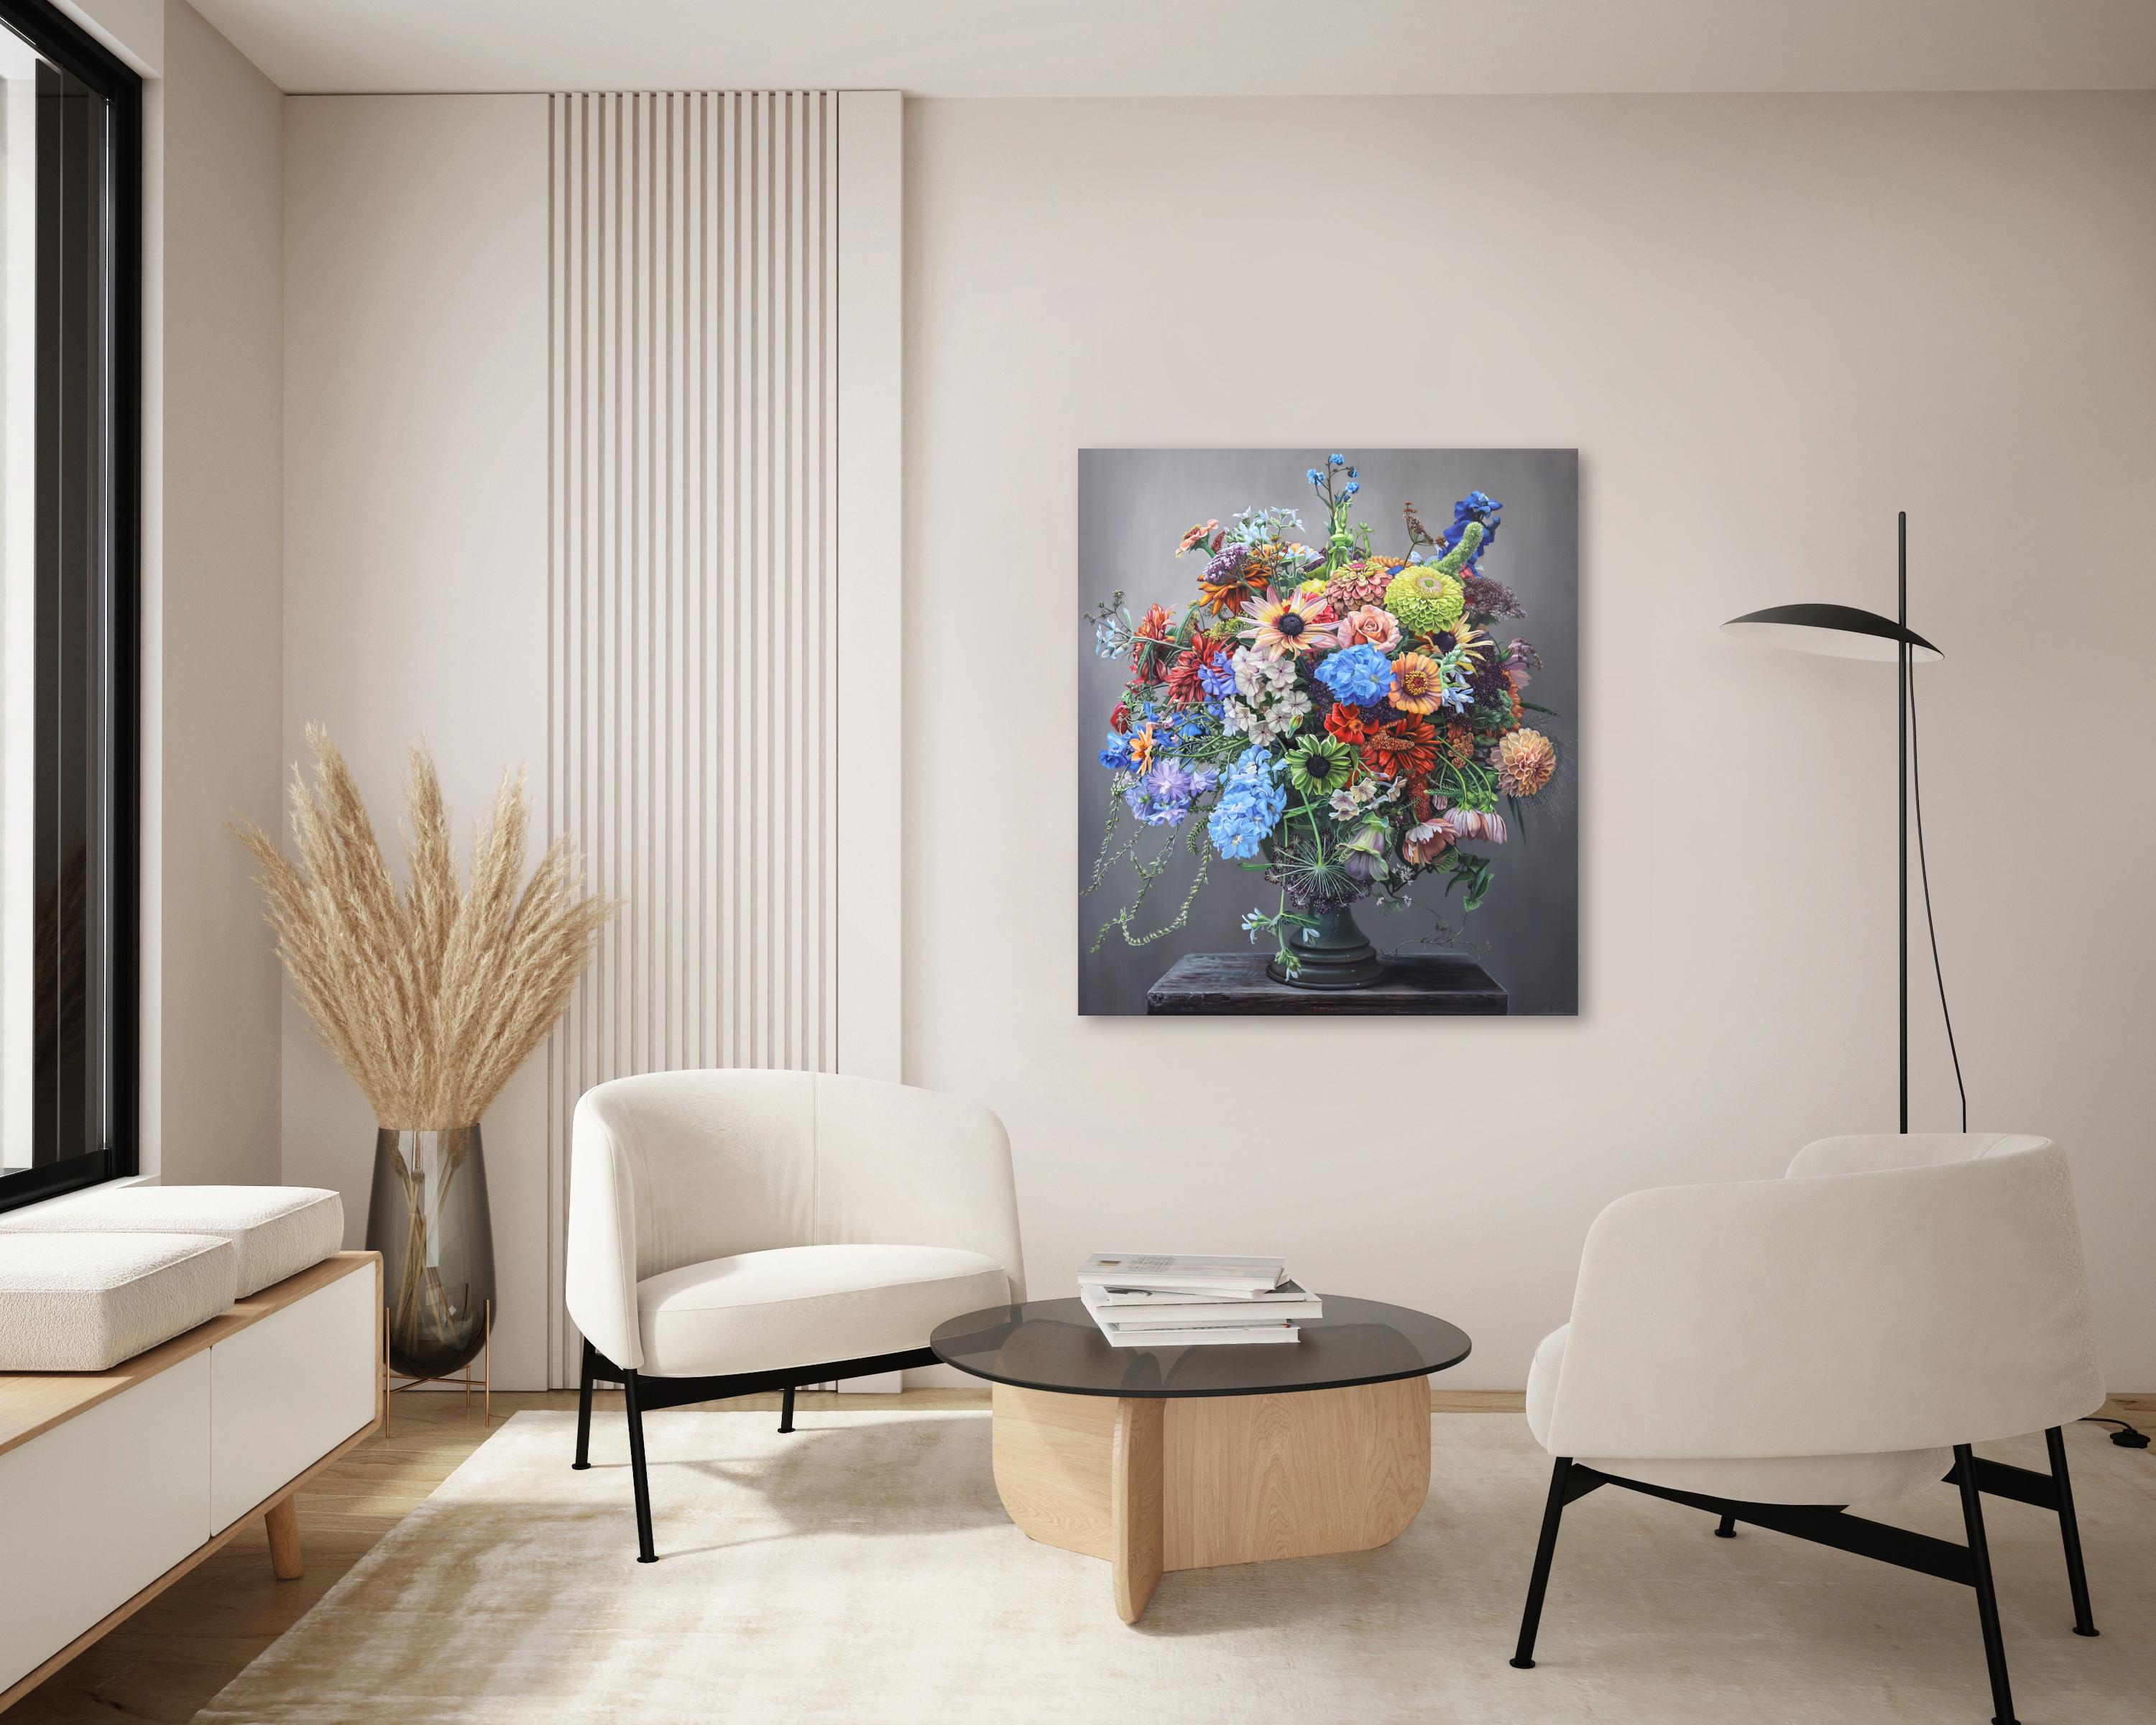 Touching Souls - Hyperrealist Floral Still Life Oil Painting 2